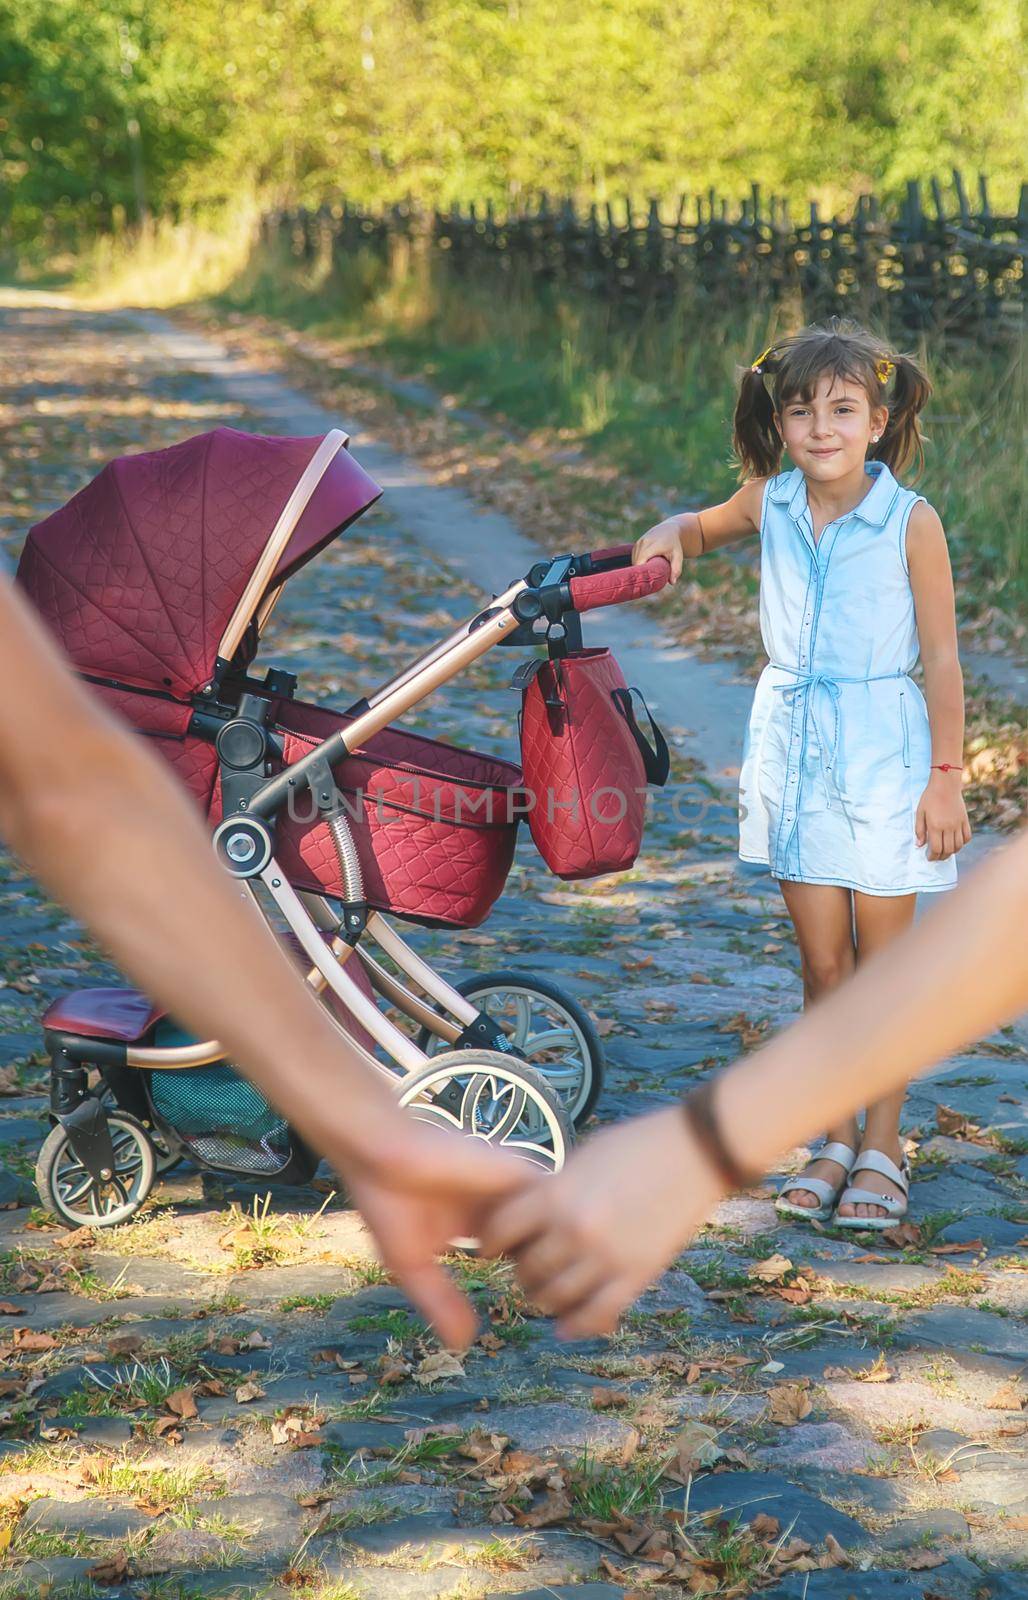 Family photo with a stroller in nature. Selective focus. People.